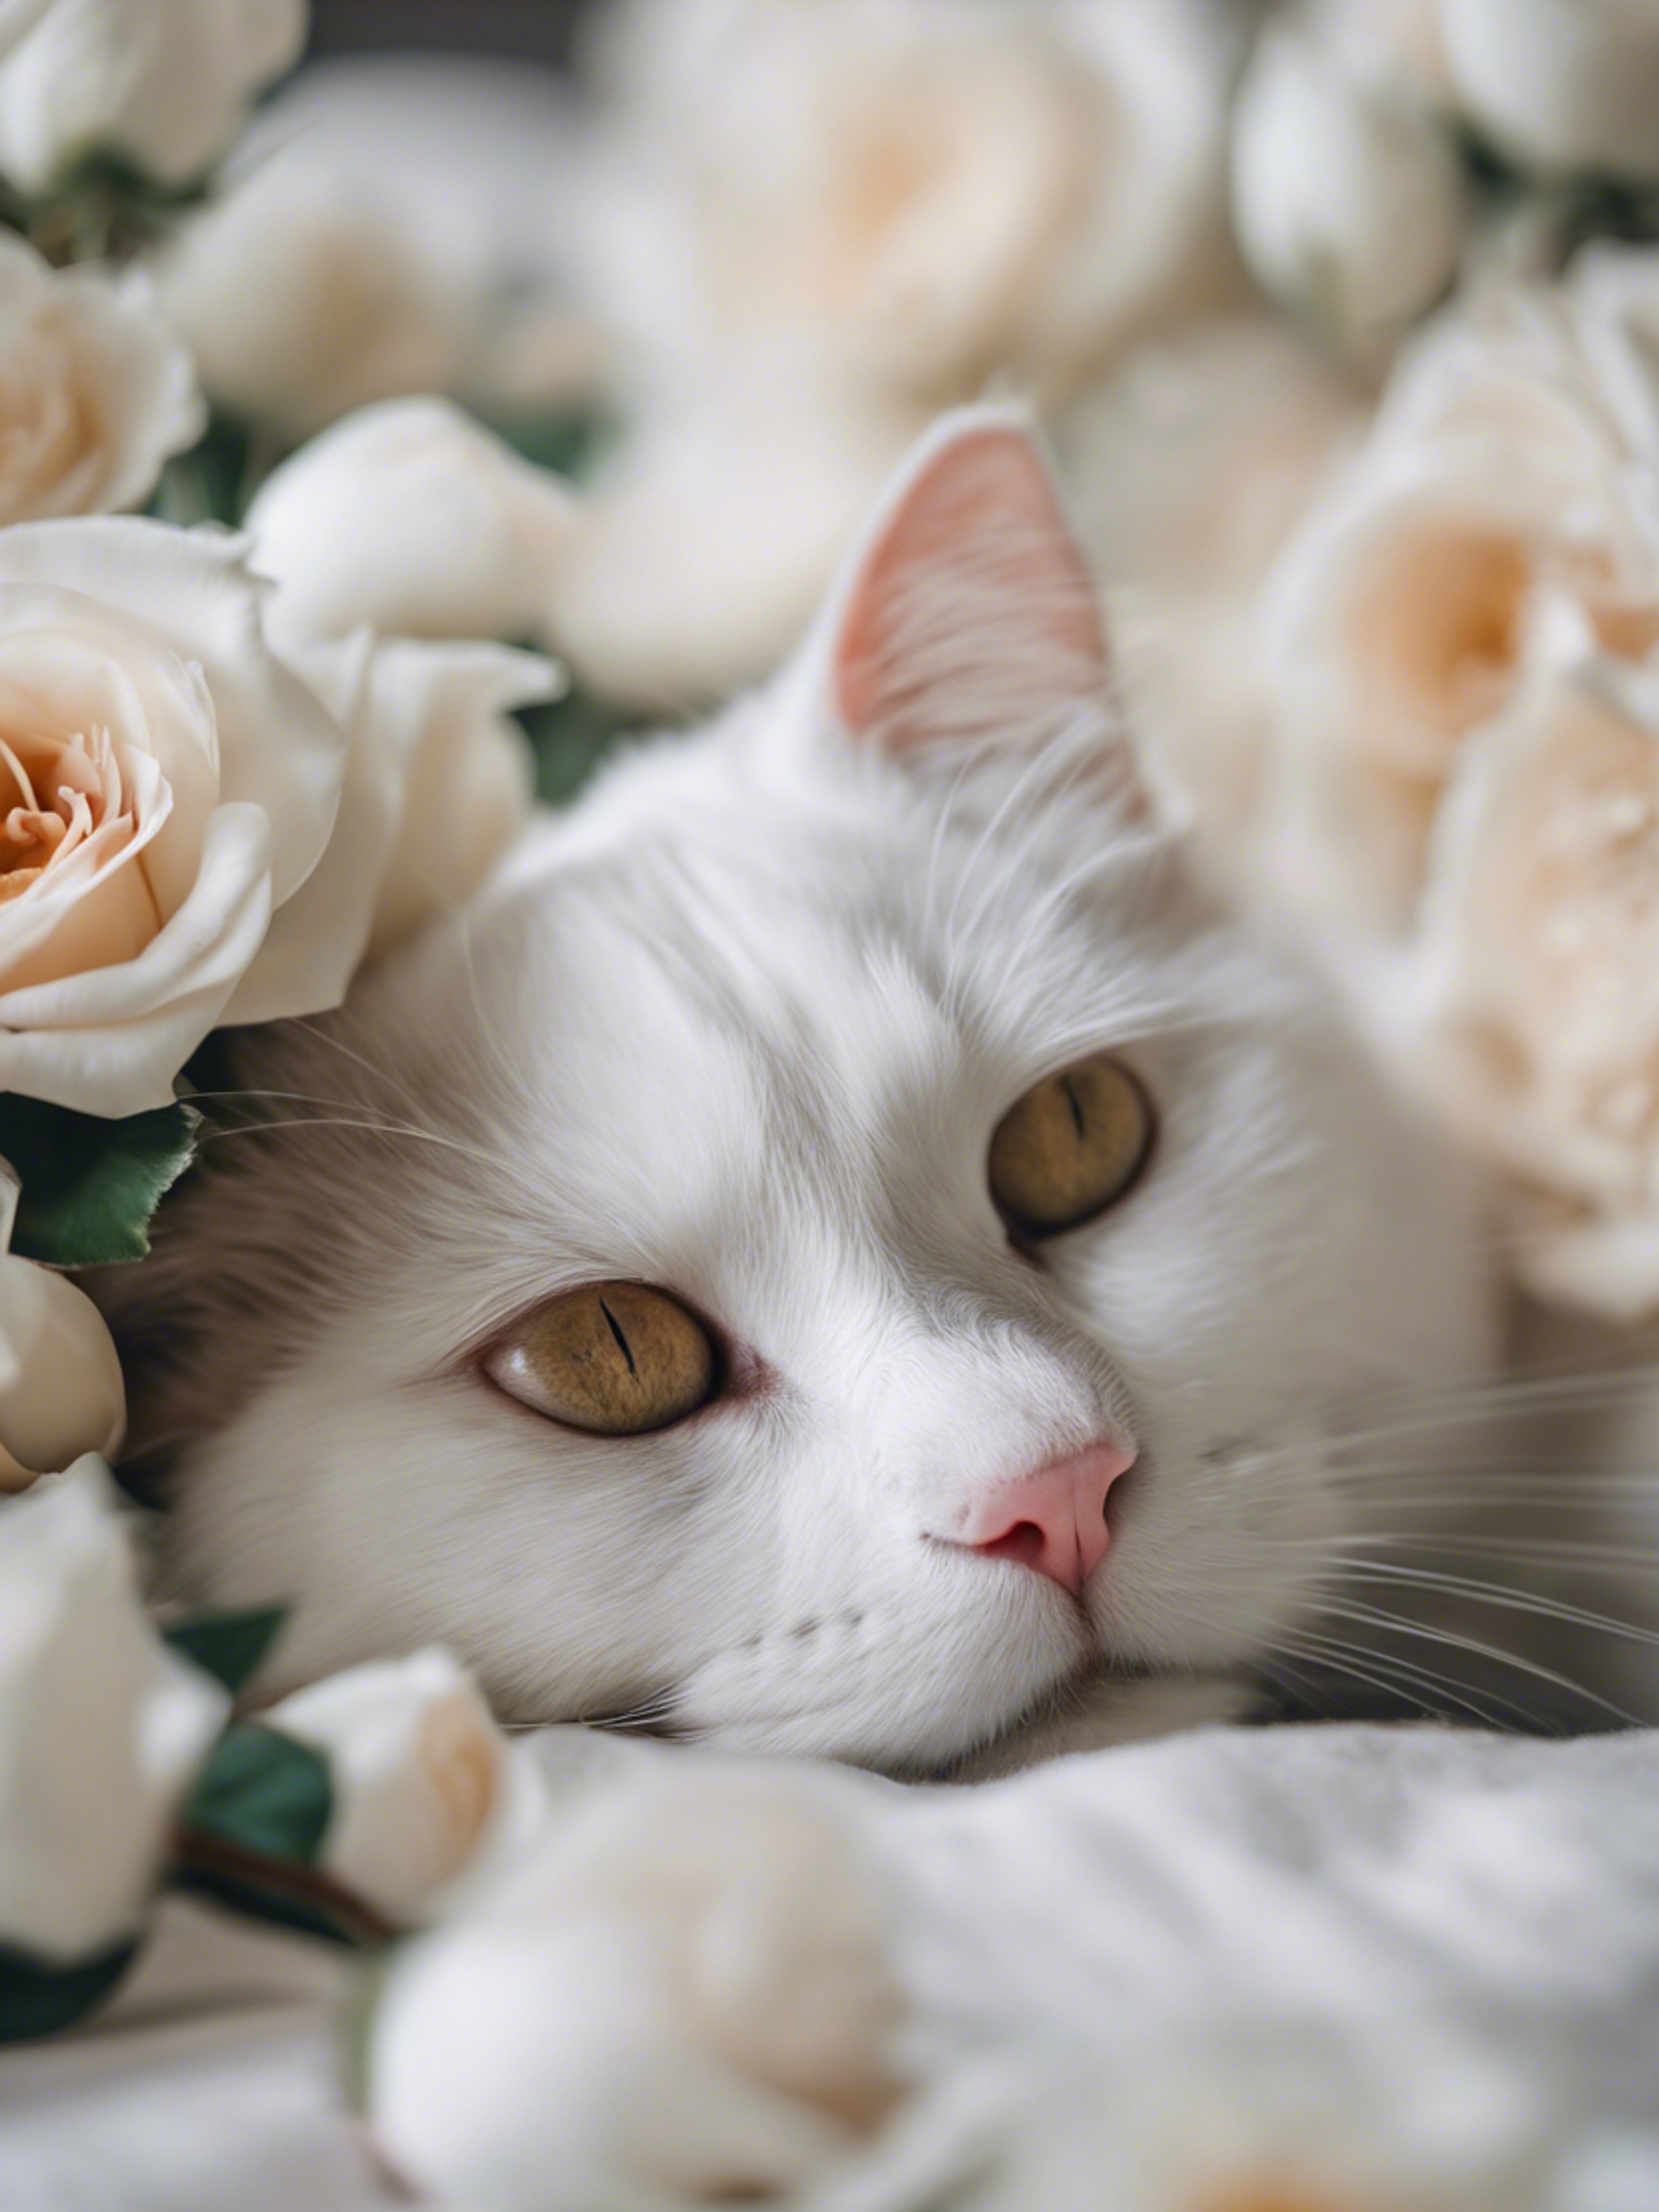 A picturesque content white cat sleeping amidst a bed of white roses. Tapeta[21bd514b84c74c92a754]